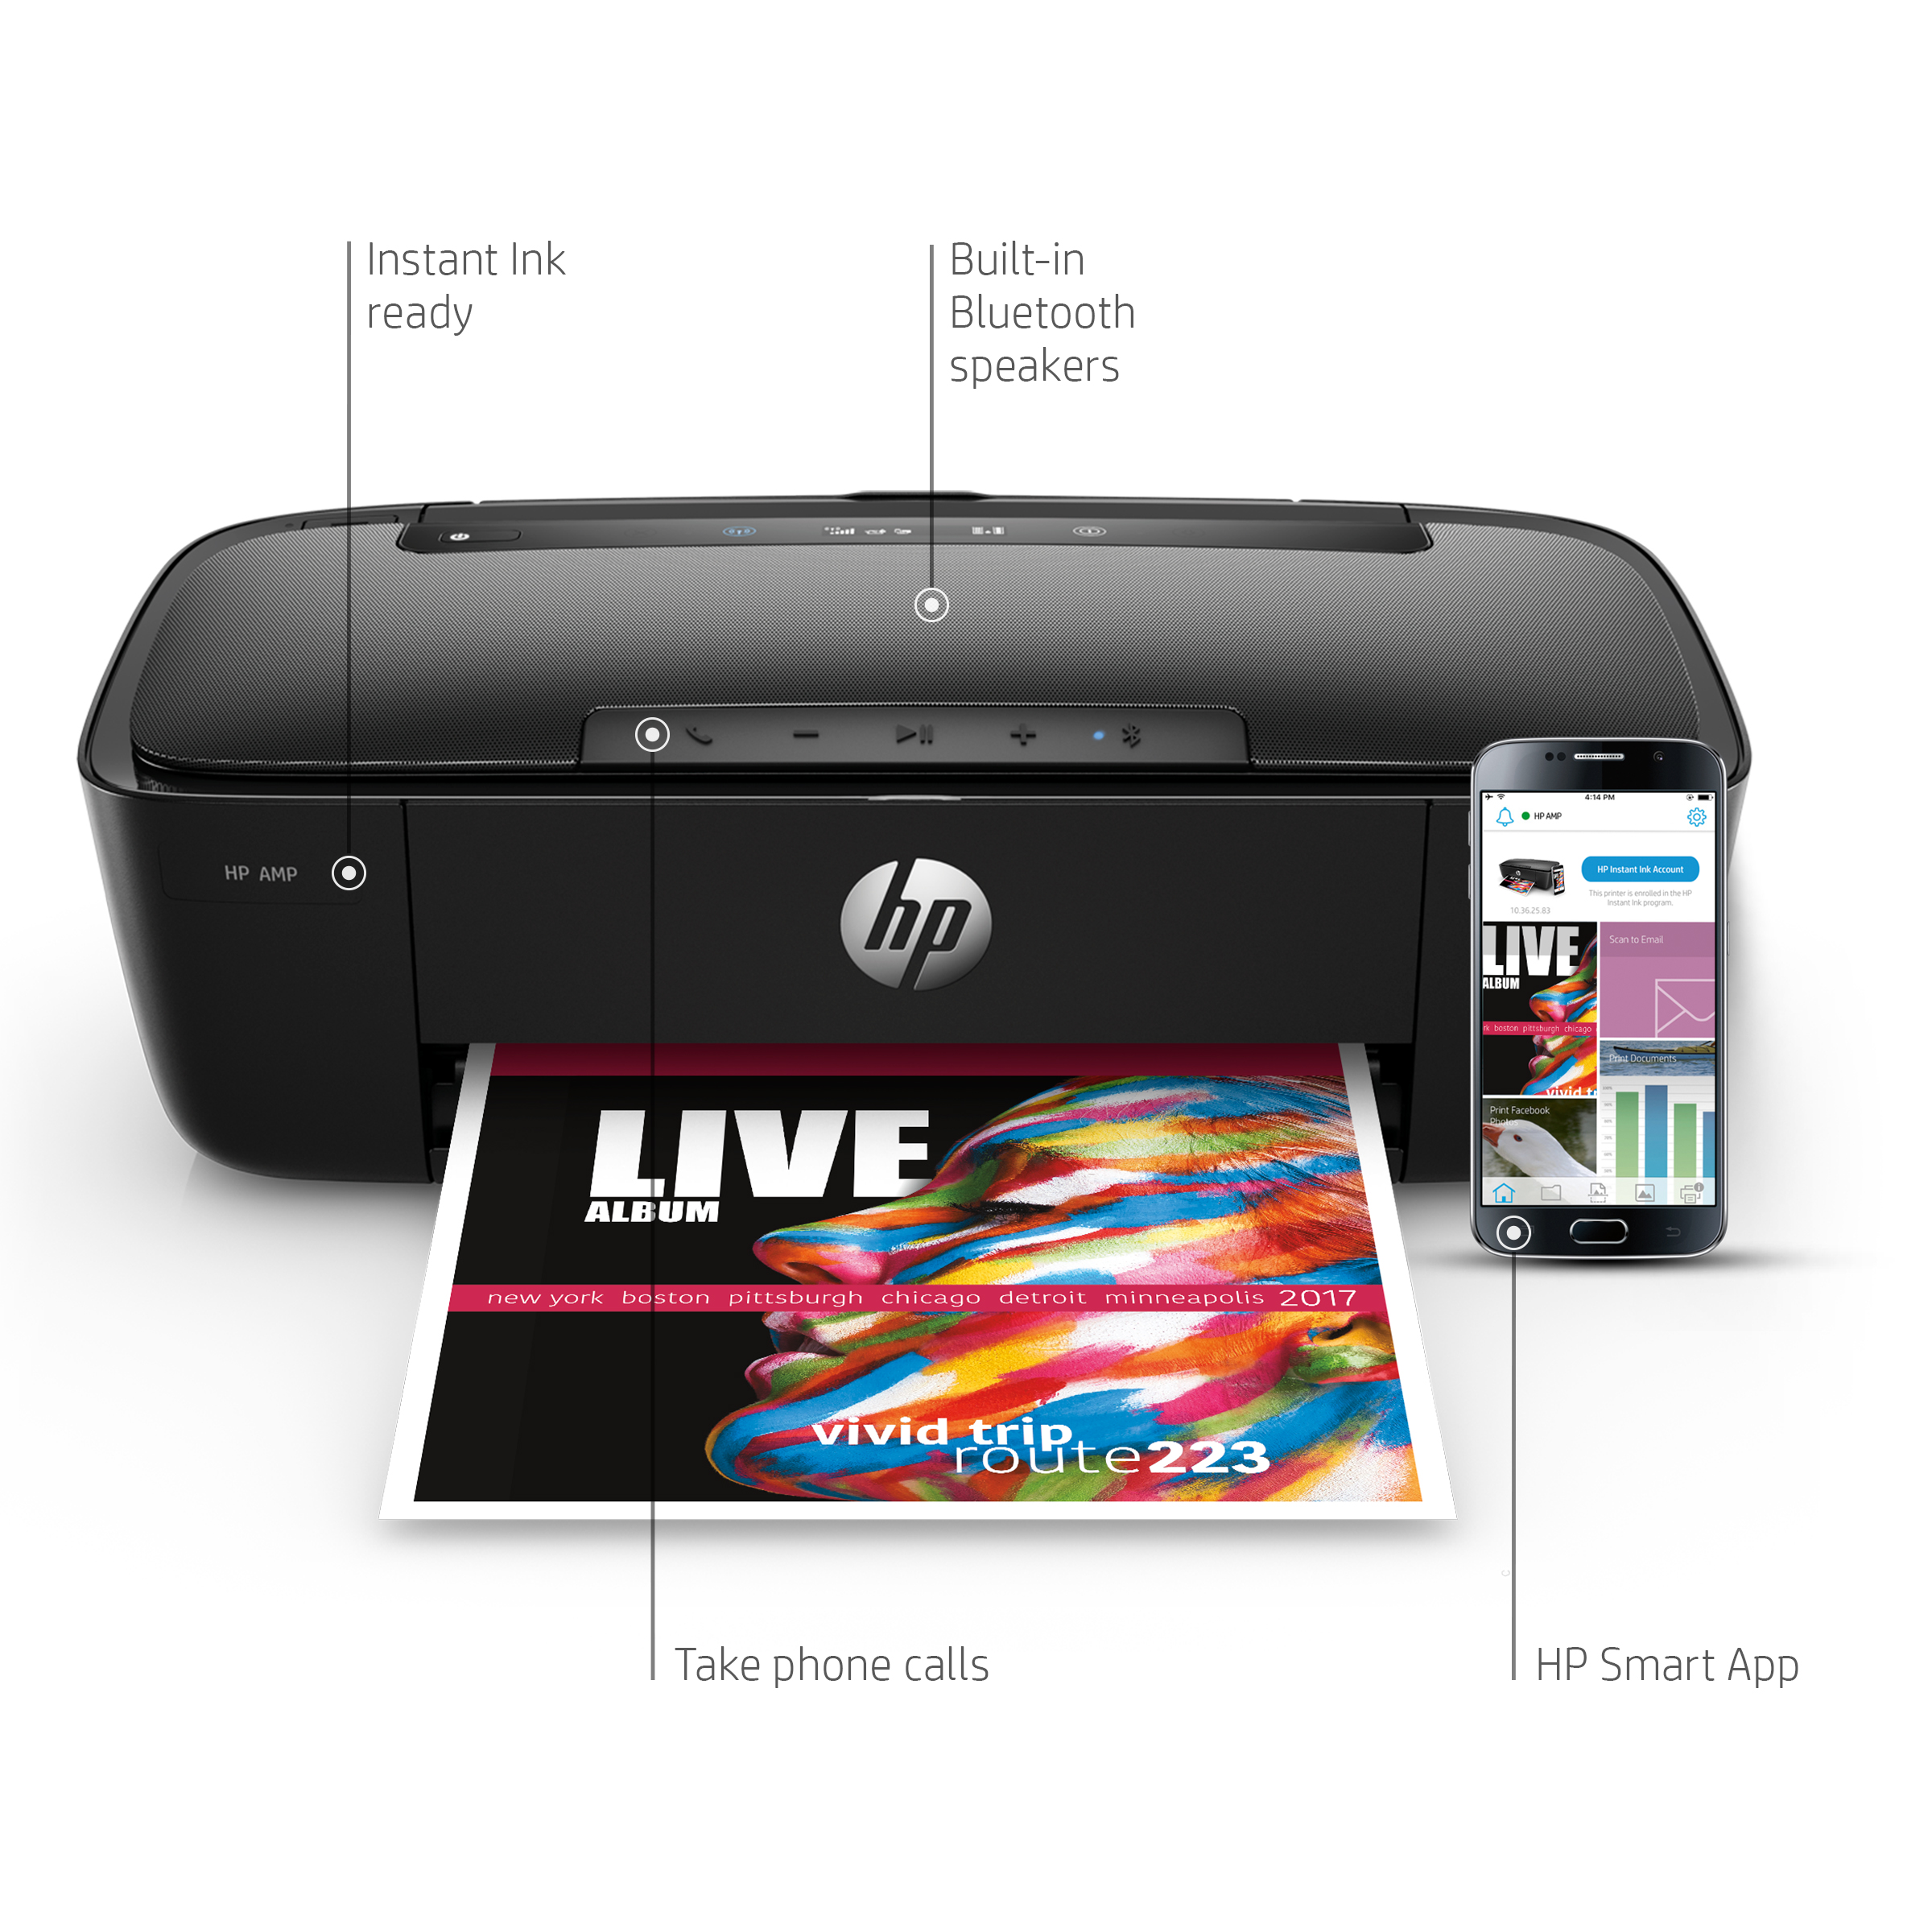 HP T8X39A#1H5 AMP 100 Printer with built-in Bluetooth speaker - image 1 of 17